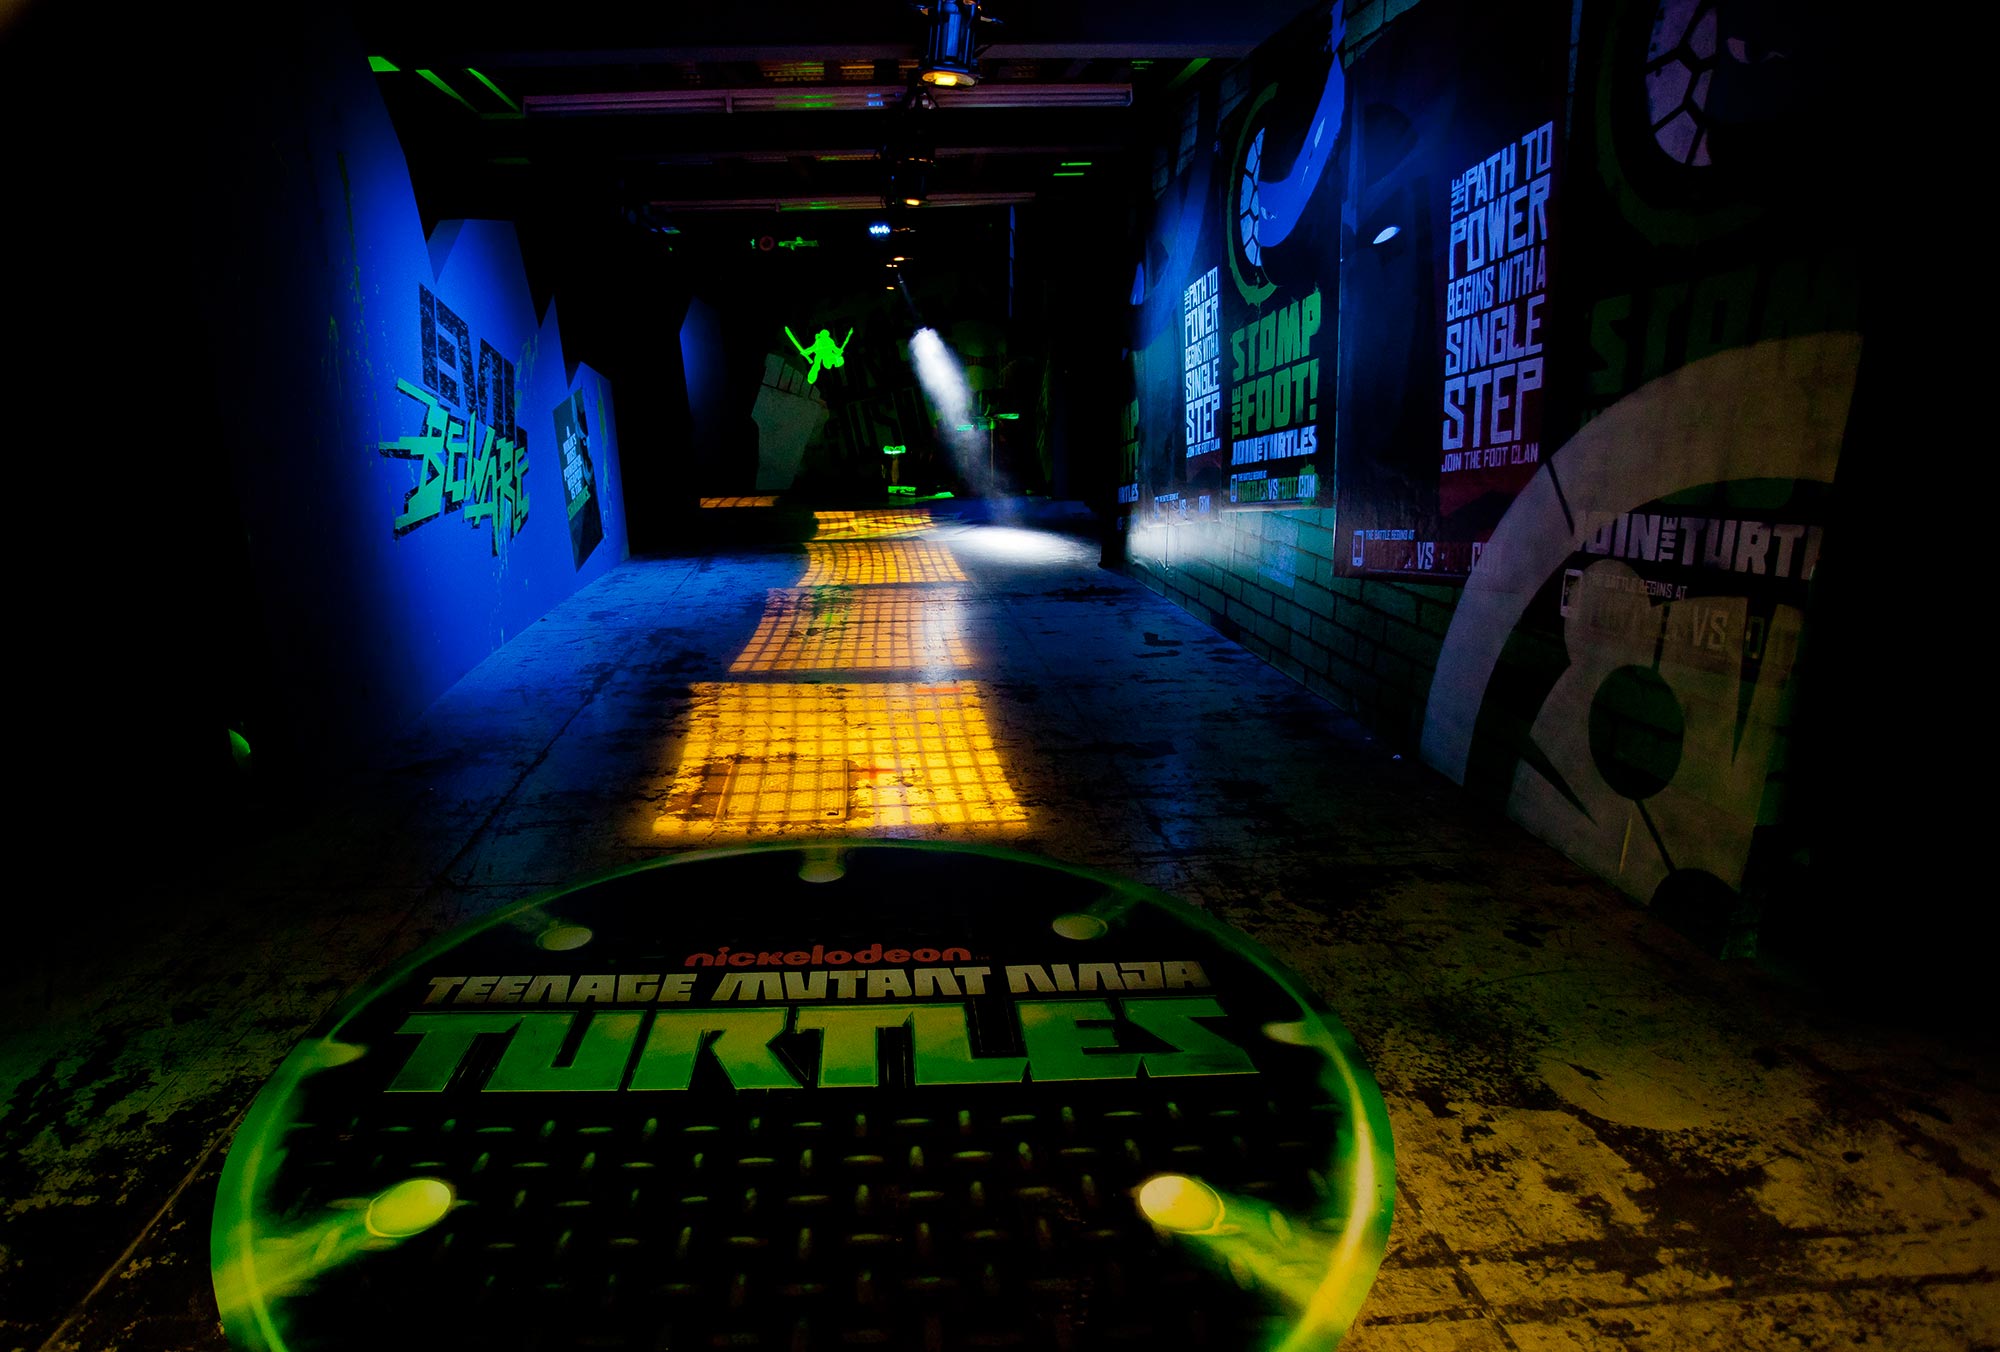 The entire hallway at the Javitz Center was transformed to resemble the TMNT iconic lair while serving as a main thoroughfare to activities at New York Comic Con.